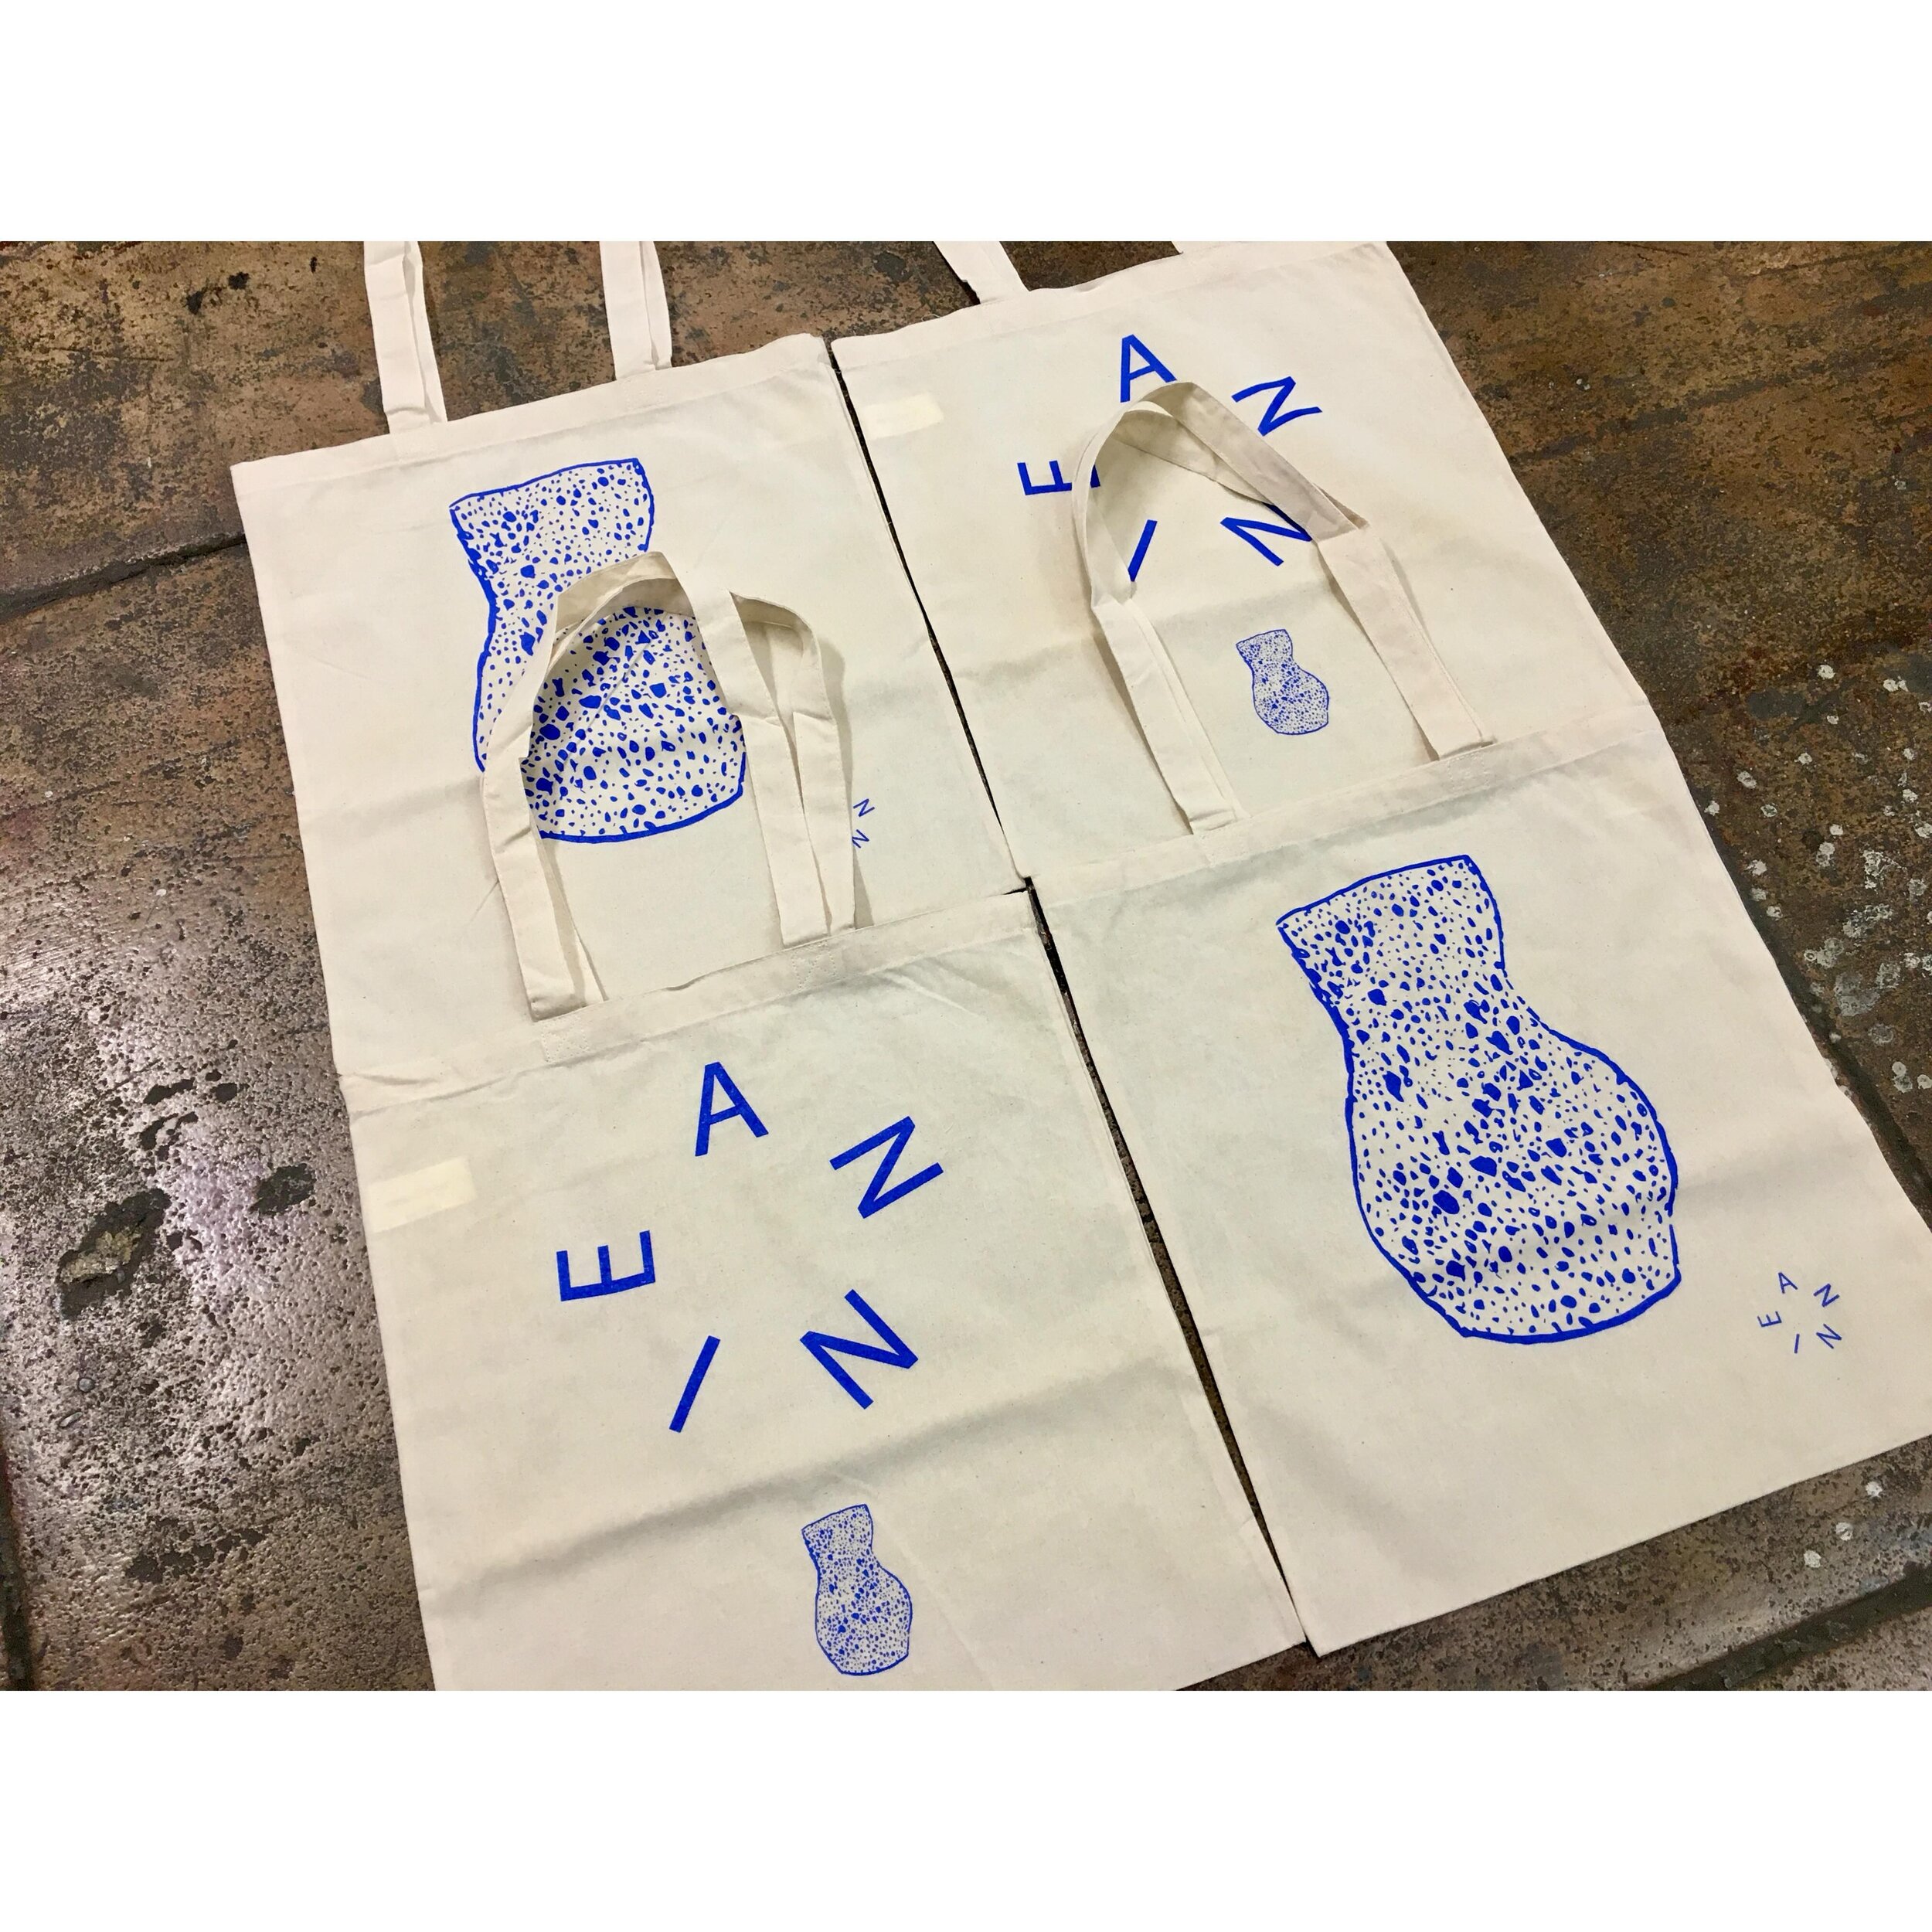 More @annierayssepottery totes.